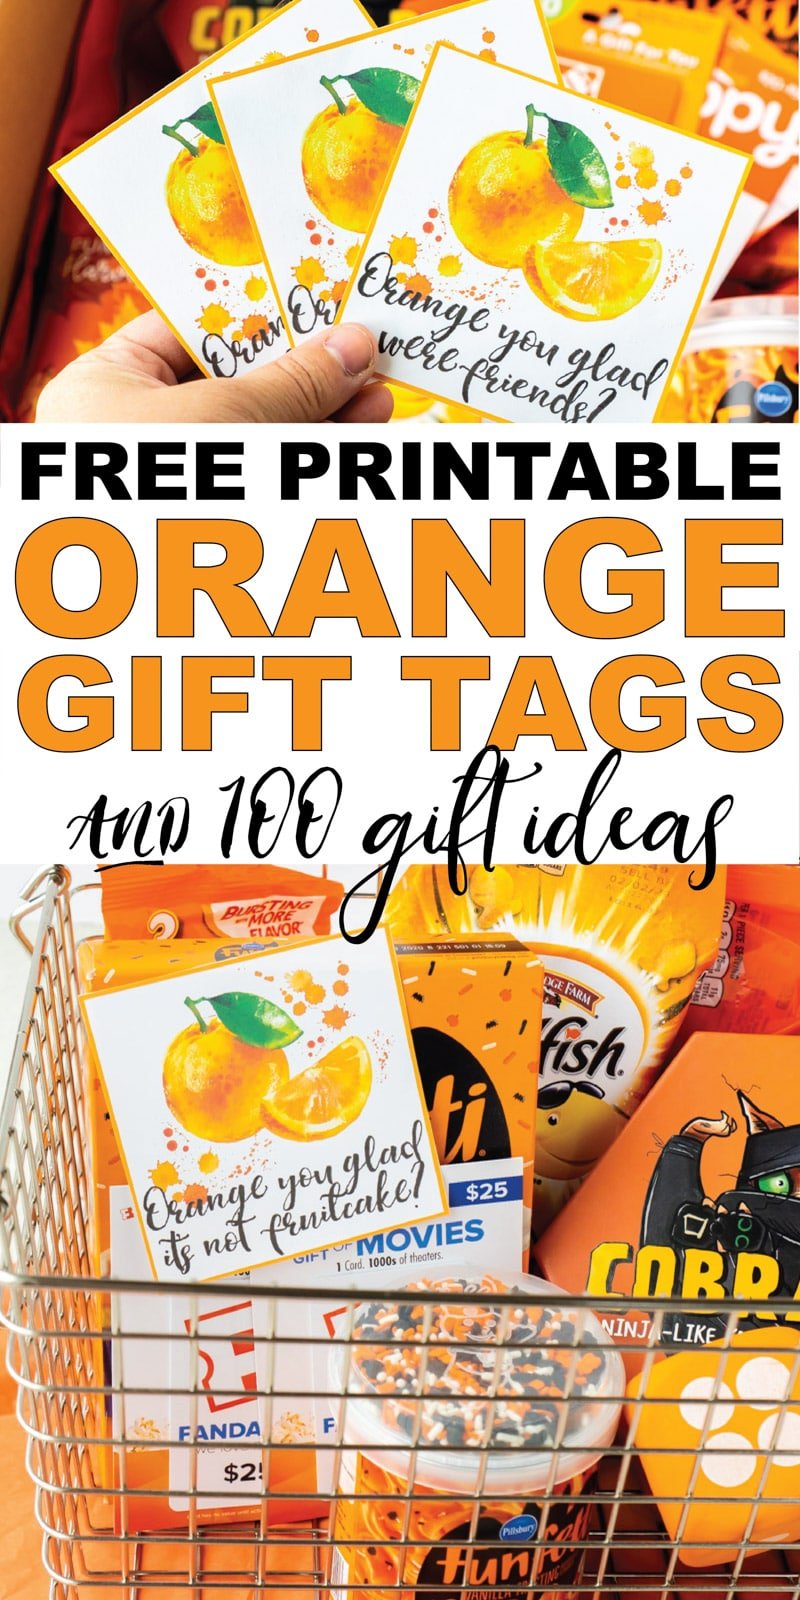 These orange you glad printable gift tags are so cute! Add them to some of the orange gift ideas for one of the best DIY thank you or holiday gift idea ever! Perfect for neighbor gifts, teacher gifts, or even a birthday gift for a friend!